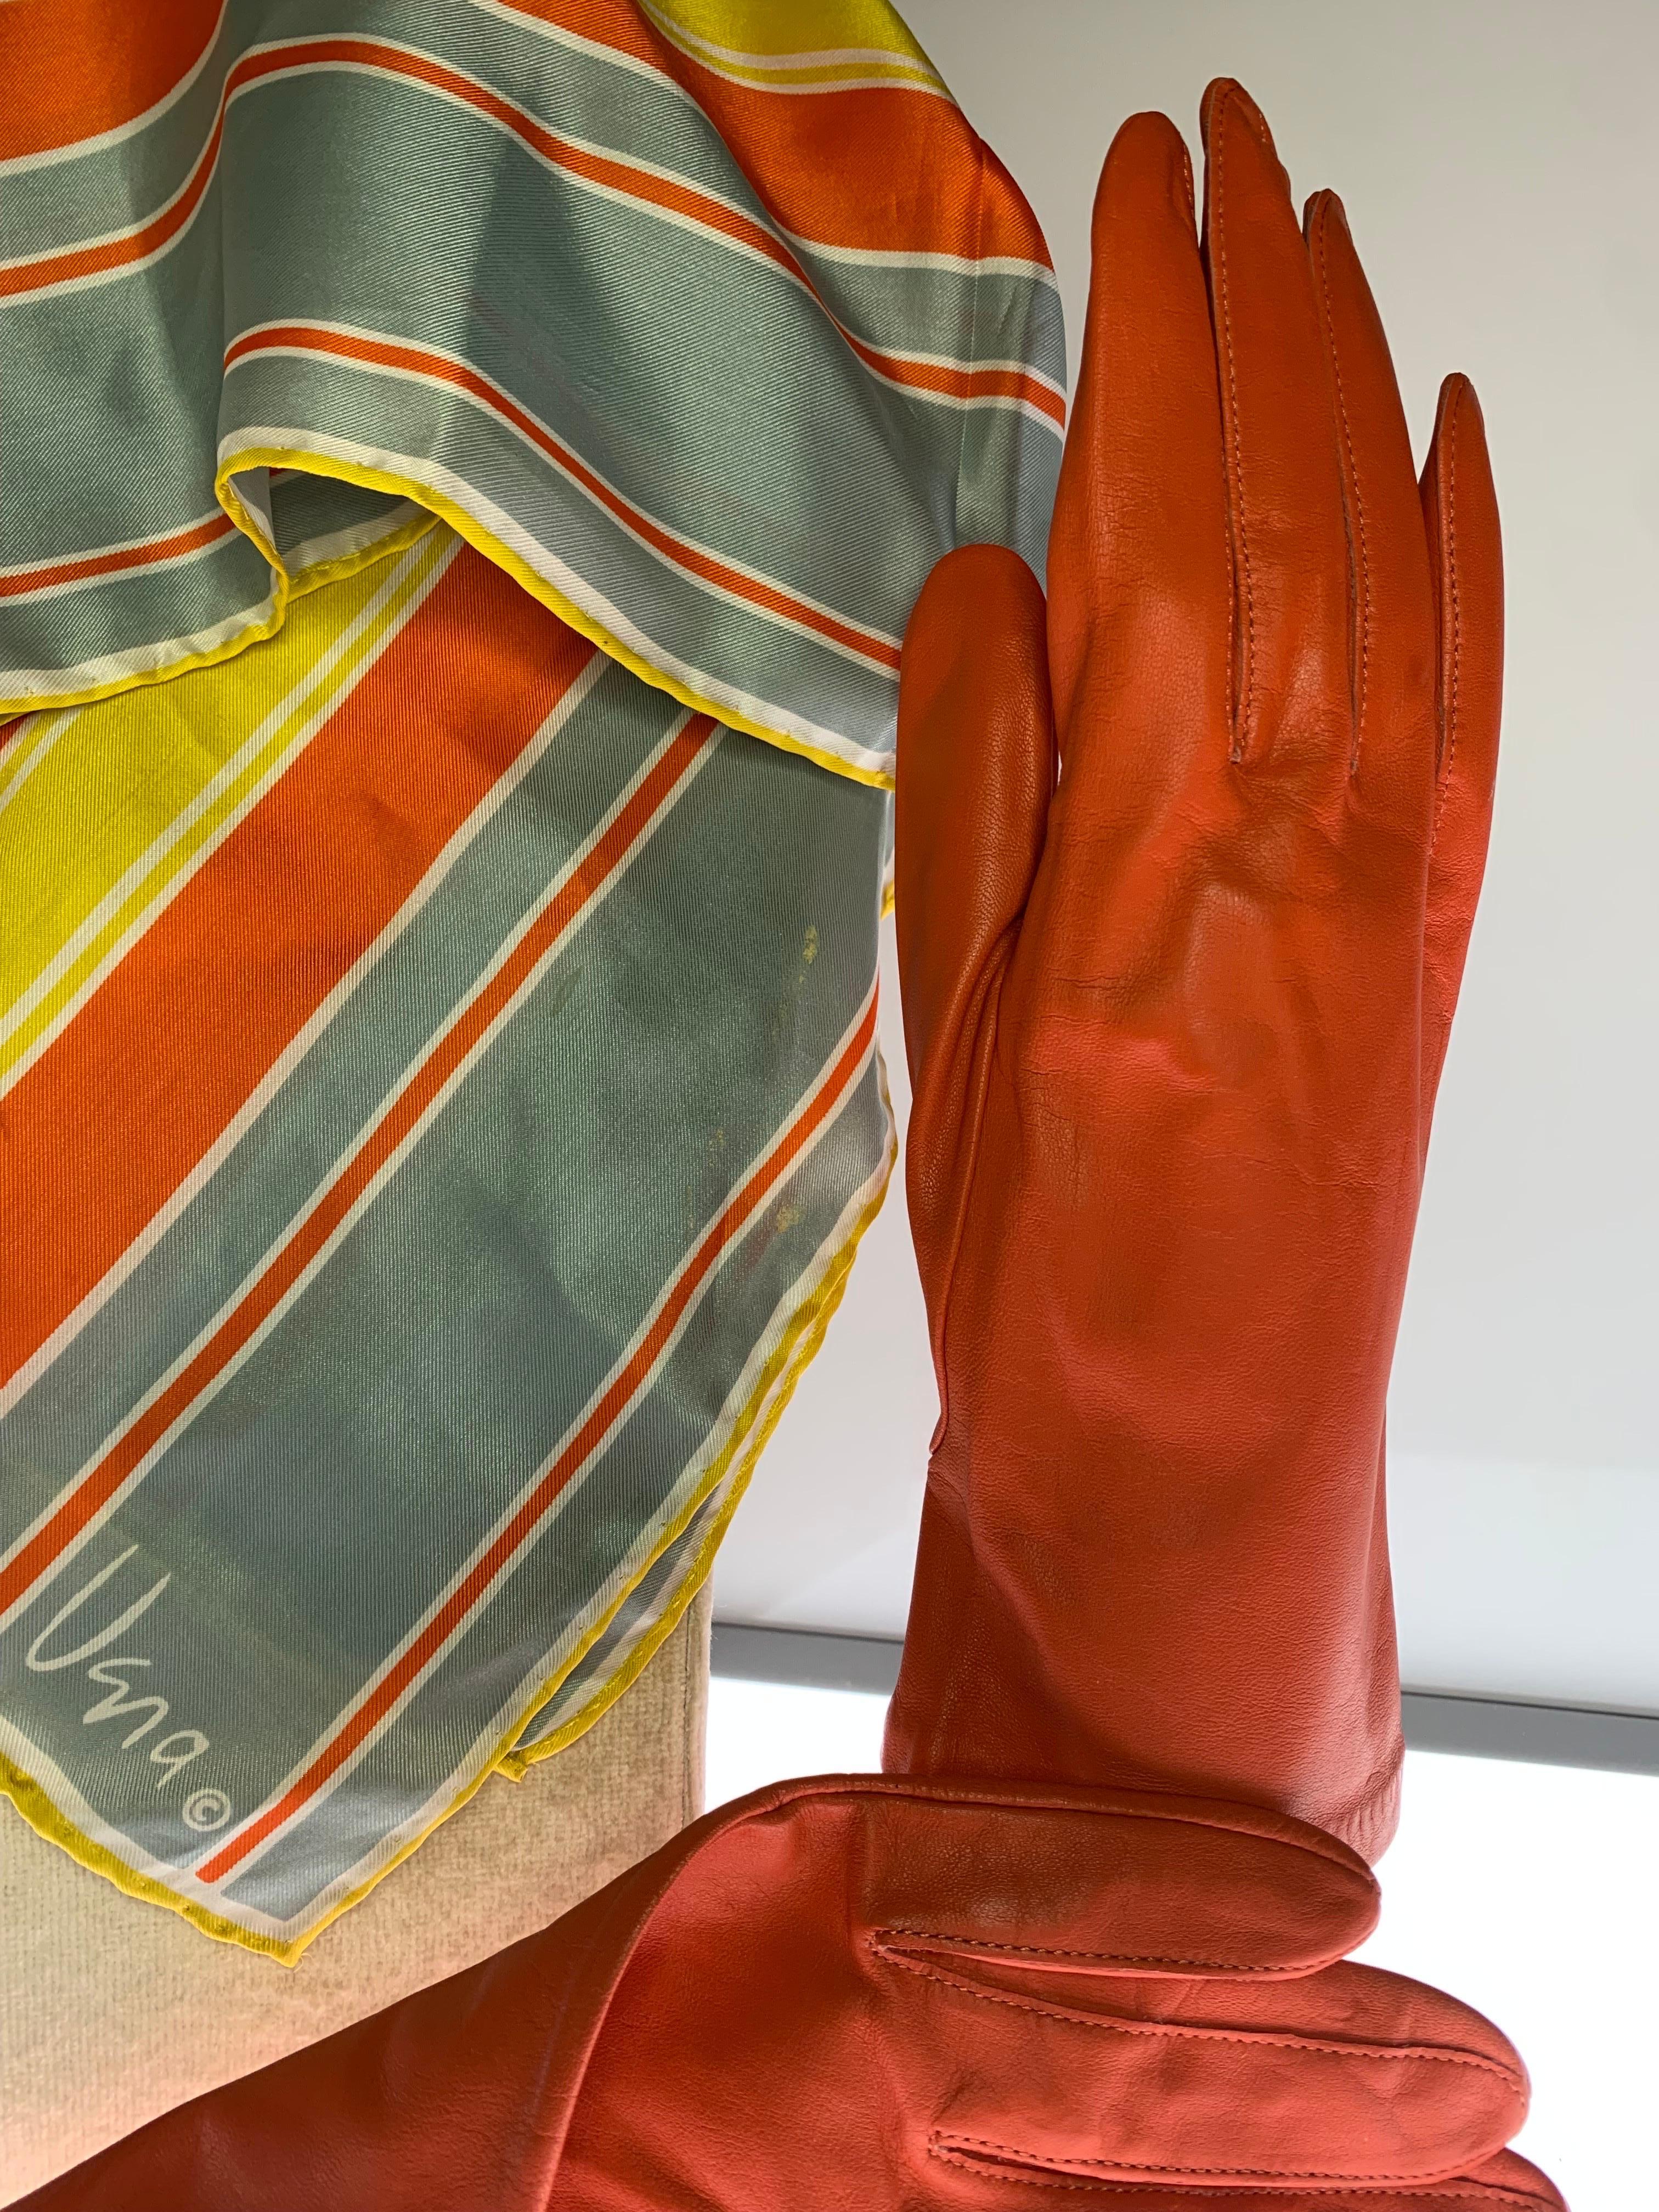 Vintage Orange Leather Gloves & Coordinating Graphic Print Vera Silk Scarf Set:  1980s Grandoe kid leather gloves, unlined in a size 8 and an orange, yellow and slate color striped silk Vera scarf to match. Sold as a set. 